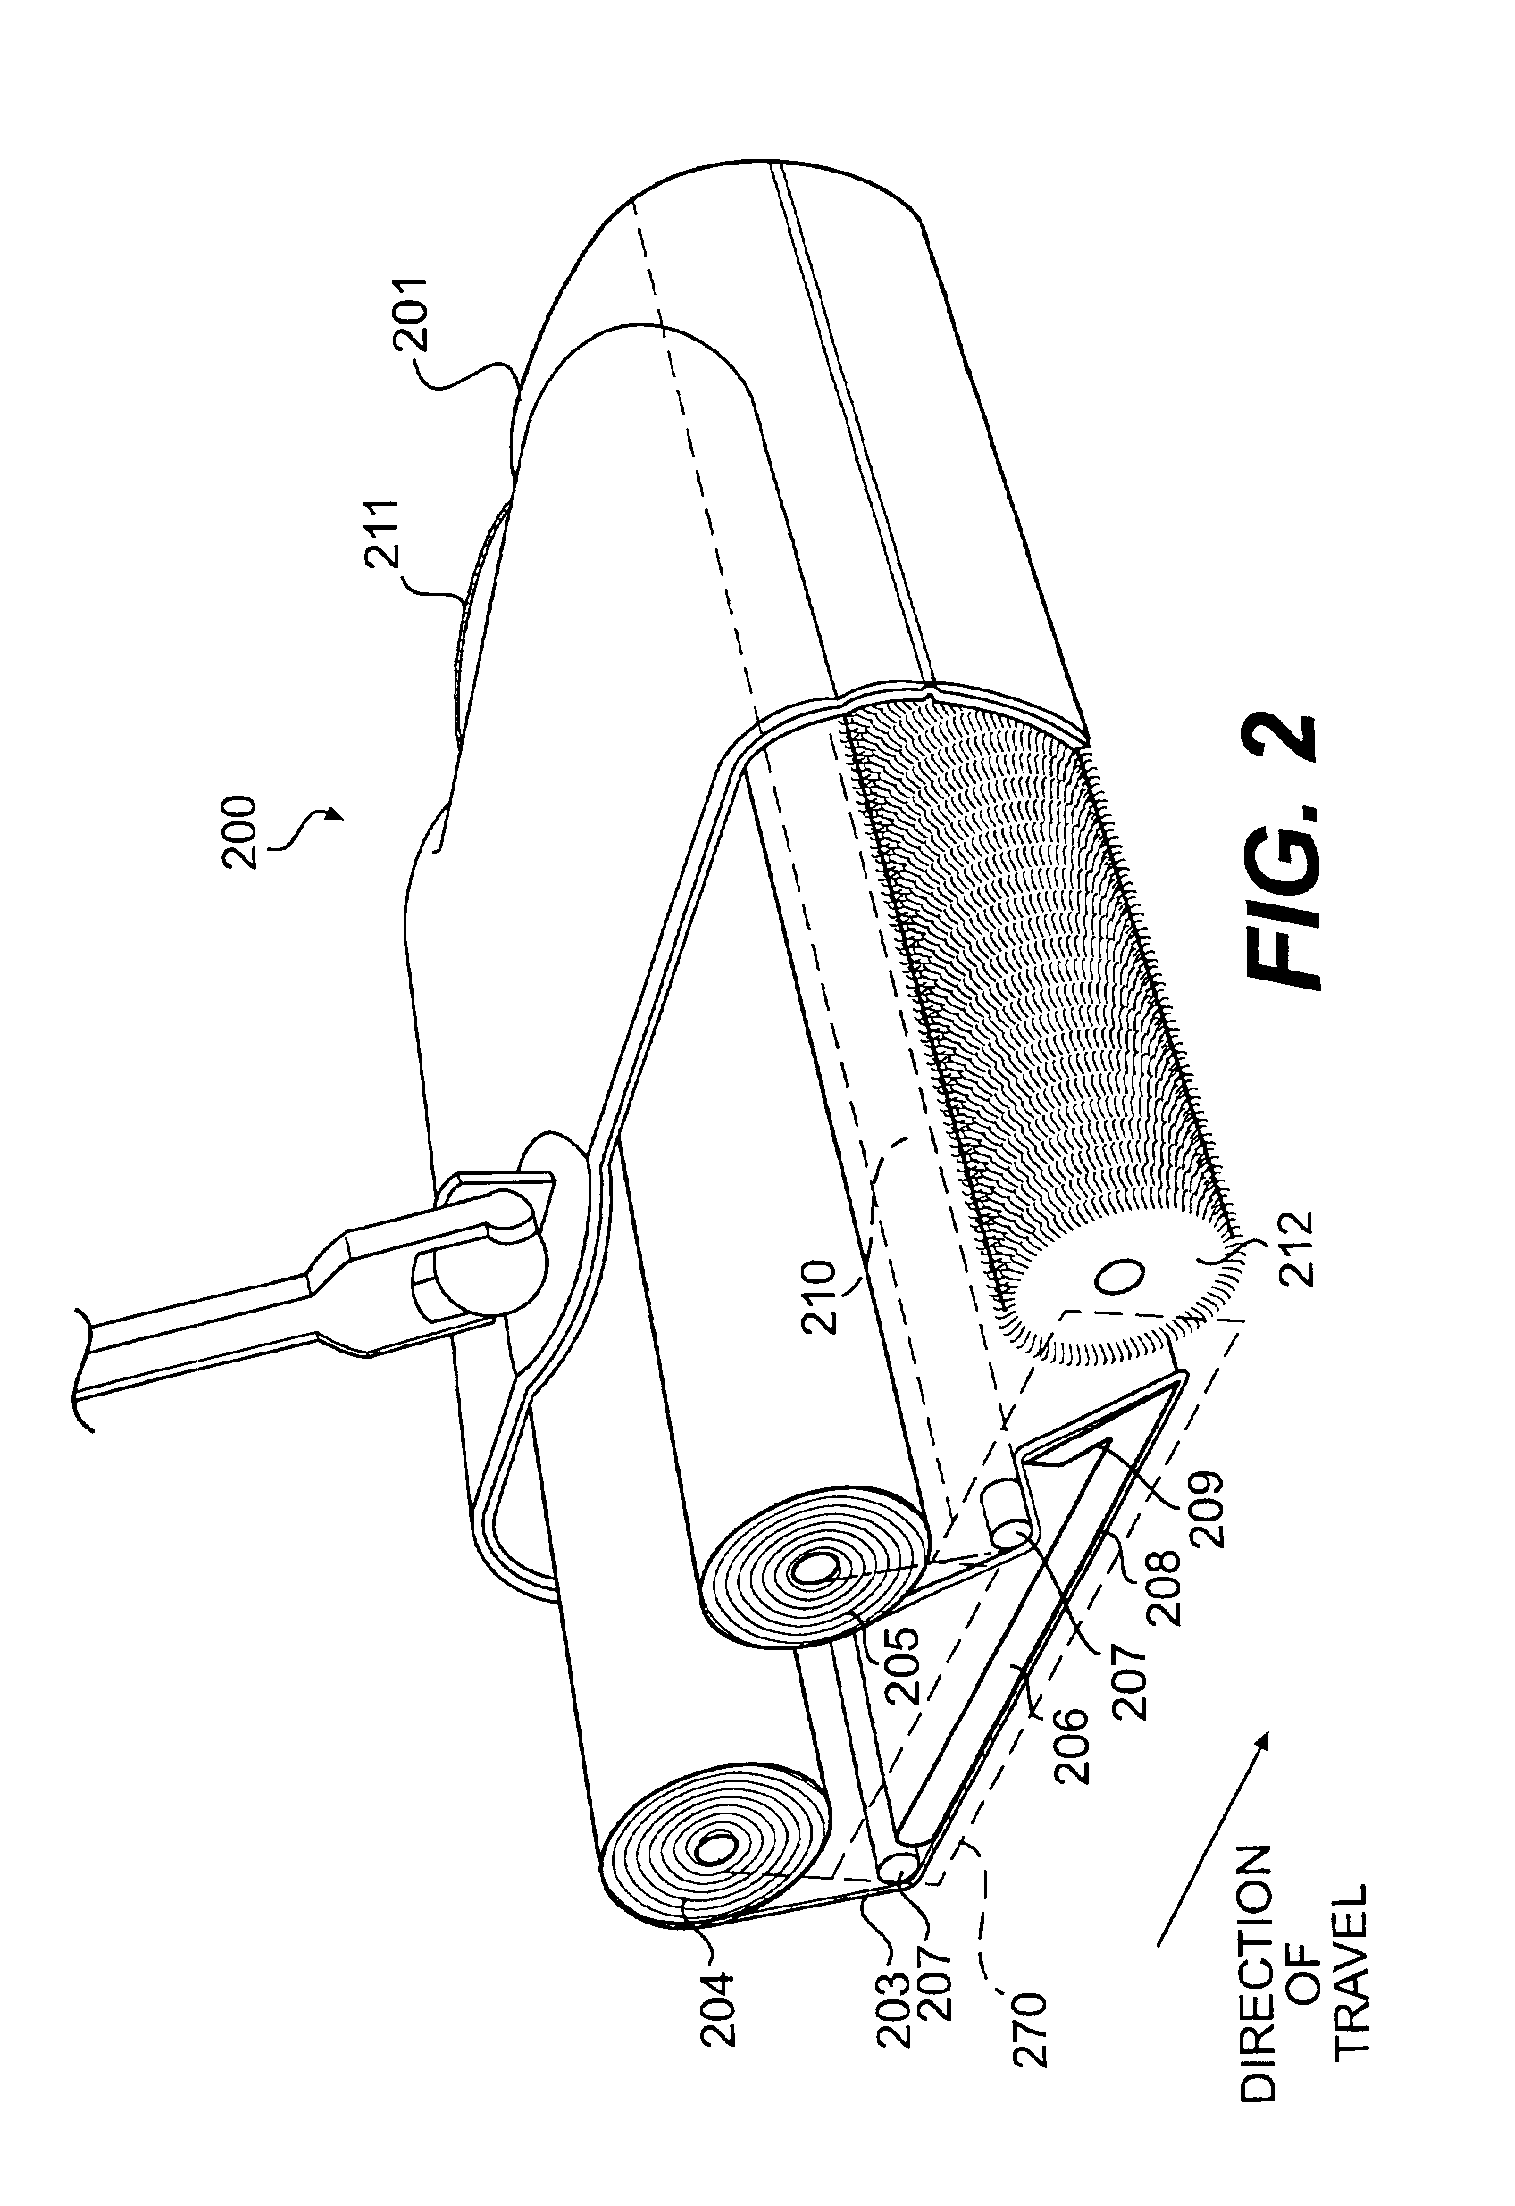 Cleaning apparatus with continuous action wiping and sweeping